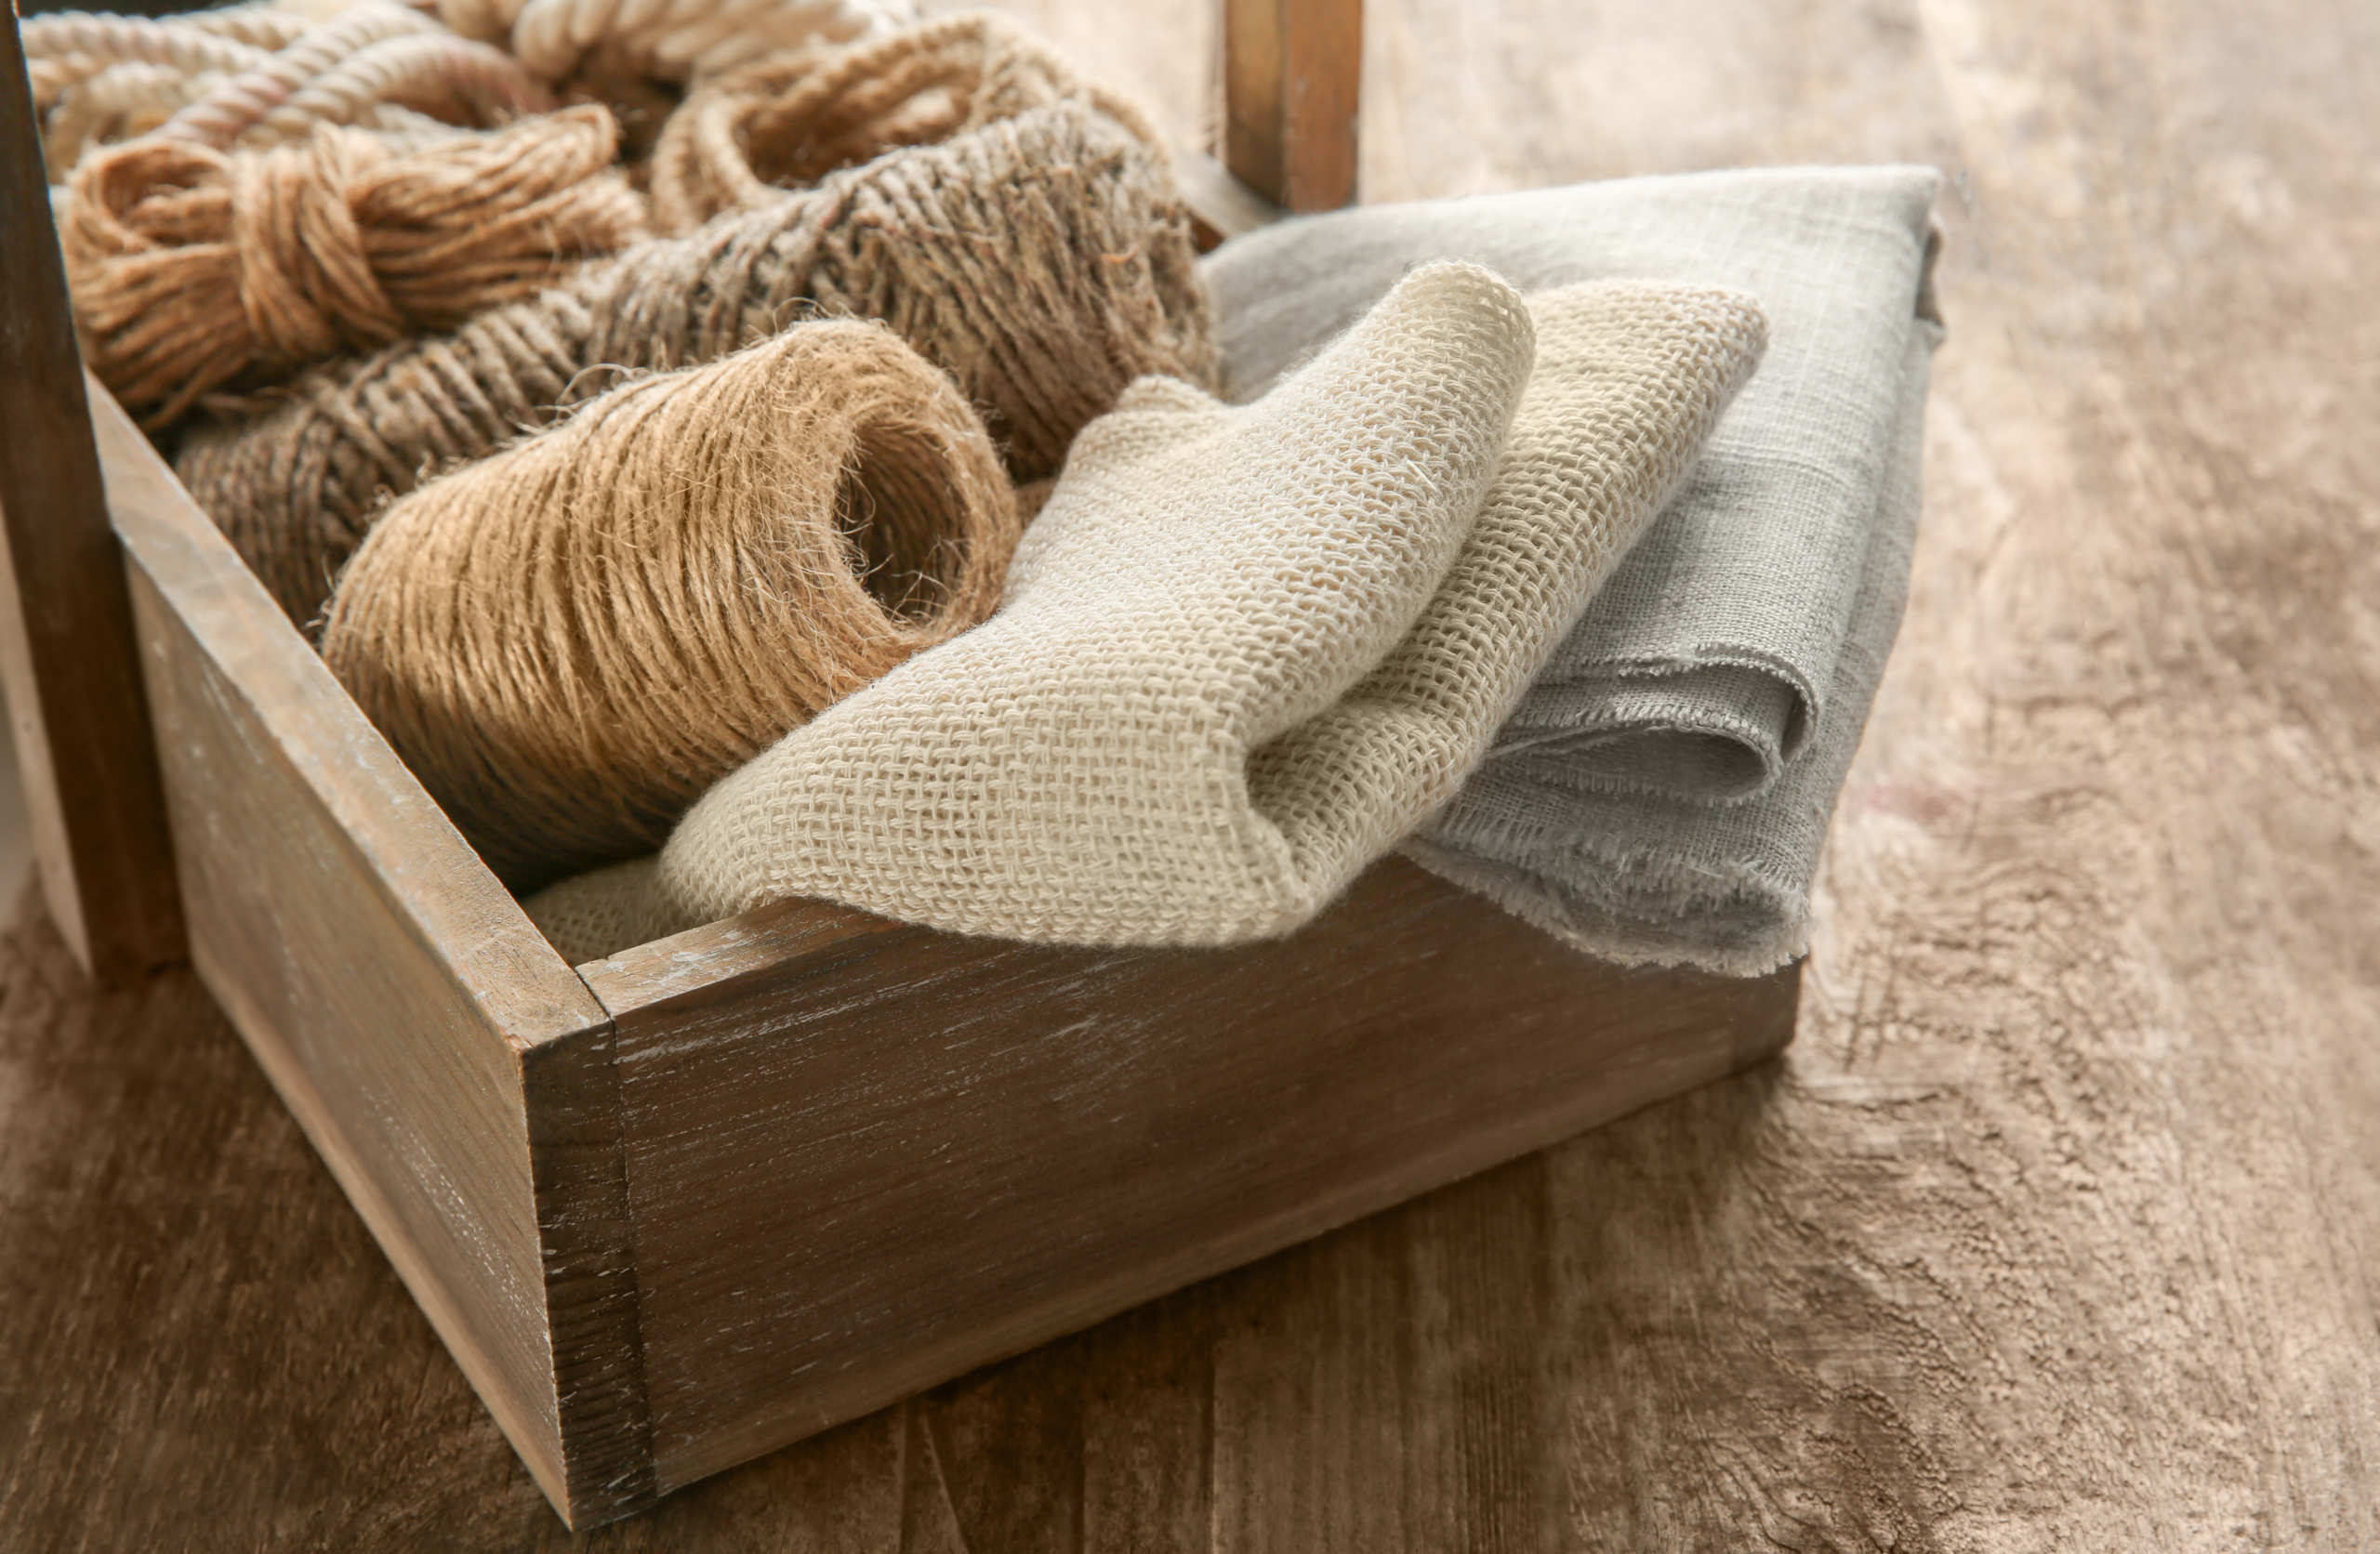 Folded hemp fabric and hemp rope and string sit in a wooden box, on a wooden table. Hemp fabric is more sustainable, stronger, and softer than other natural fabrics.